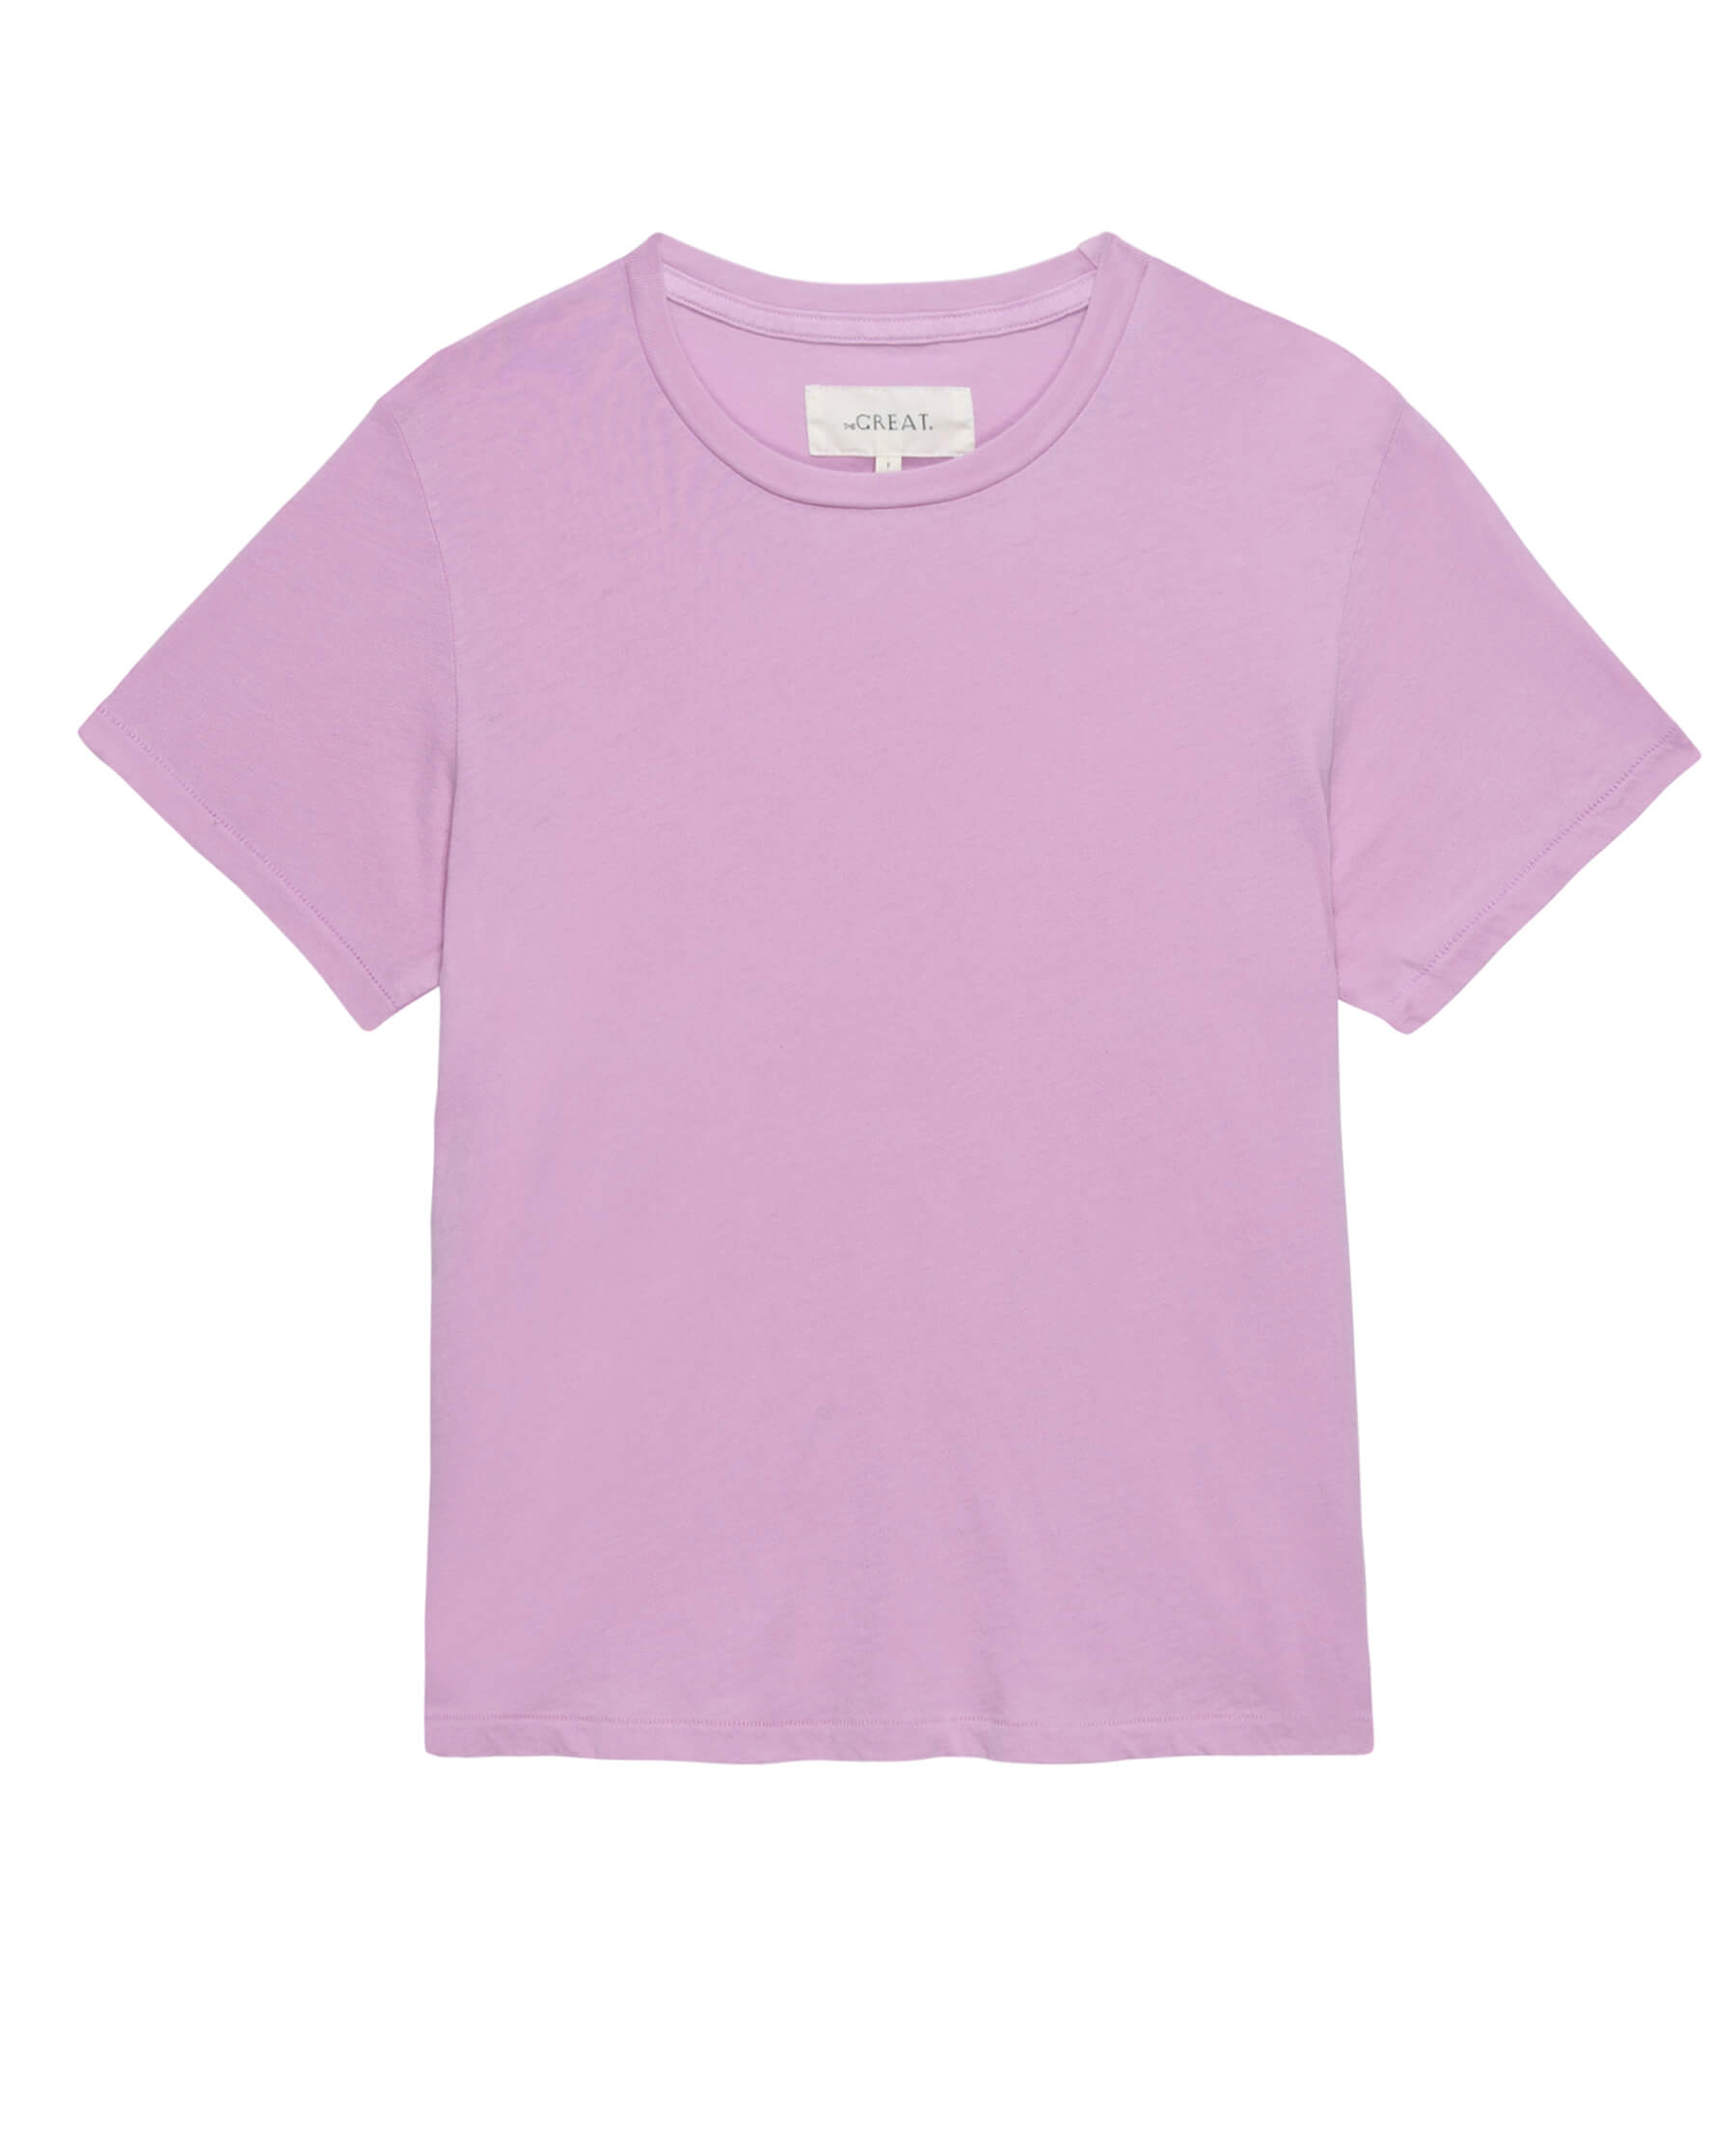 The Little Tee. -- Lilac Blossom TEES THE GREAT. SP24 KNITS